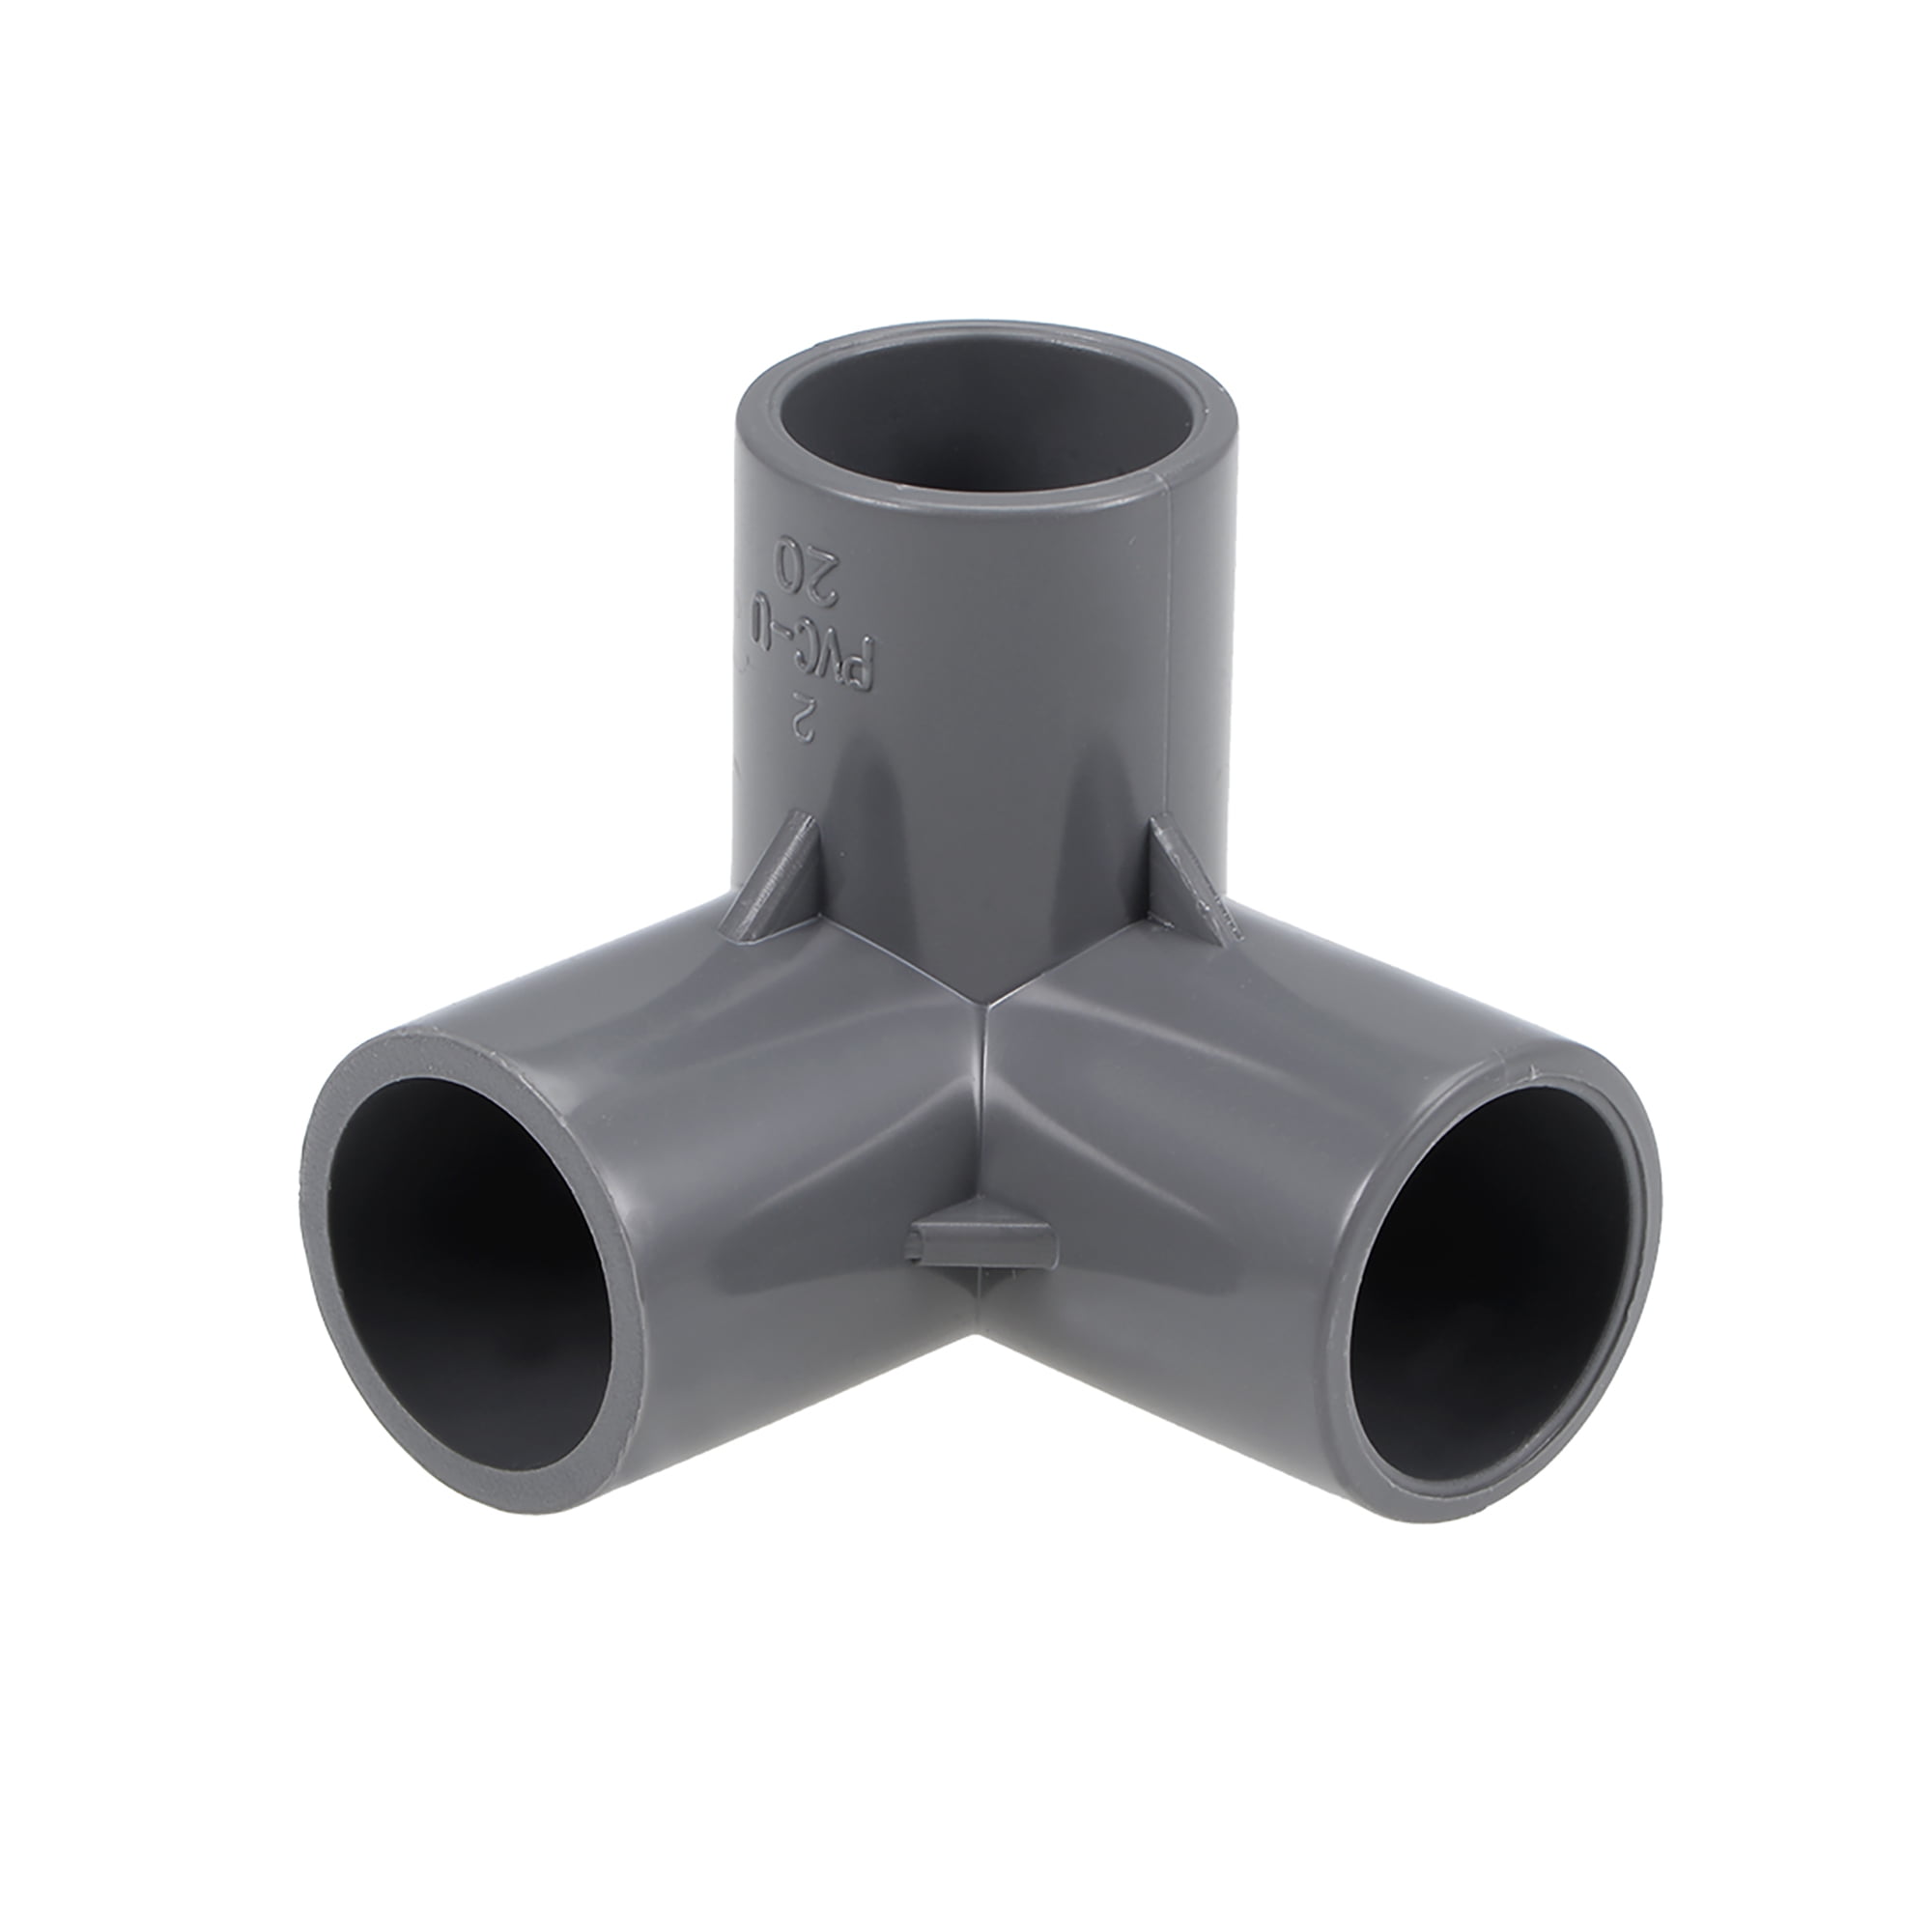 3Way Elbow PVC Pipe Fitting,Furniture Grade,1/2inch Size